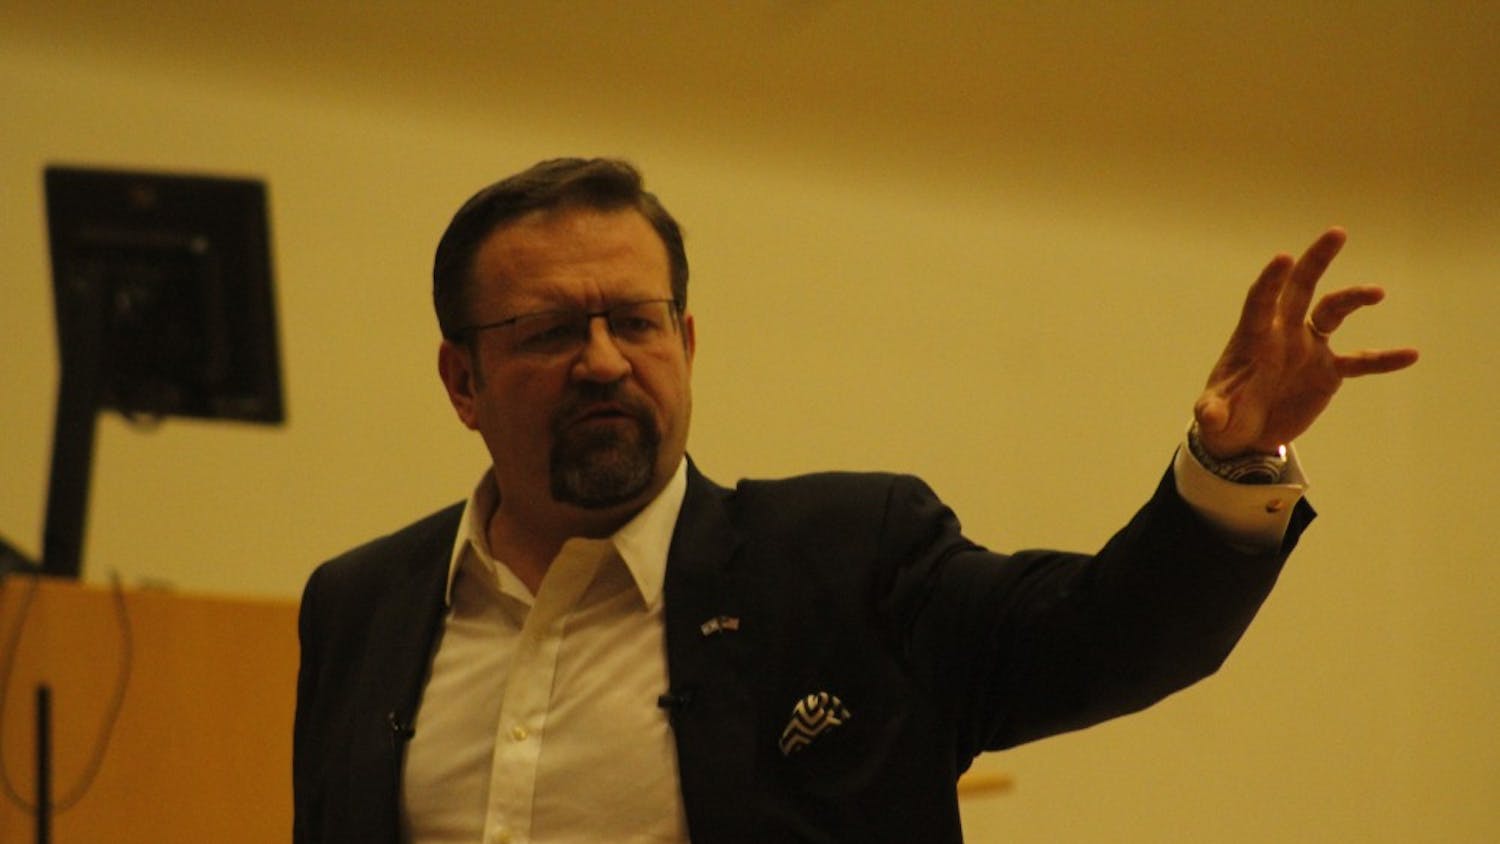 Sebastian Gorka, former advisor to President Trump, spoke about his experience in the White House as well as what the American people can expect for the future. 